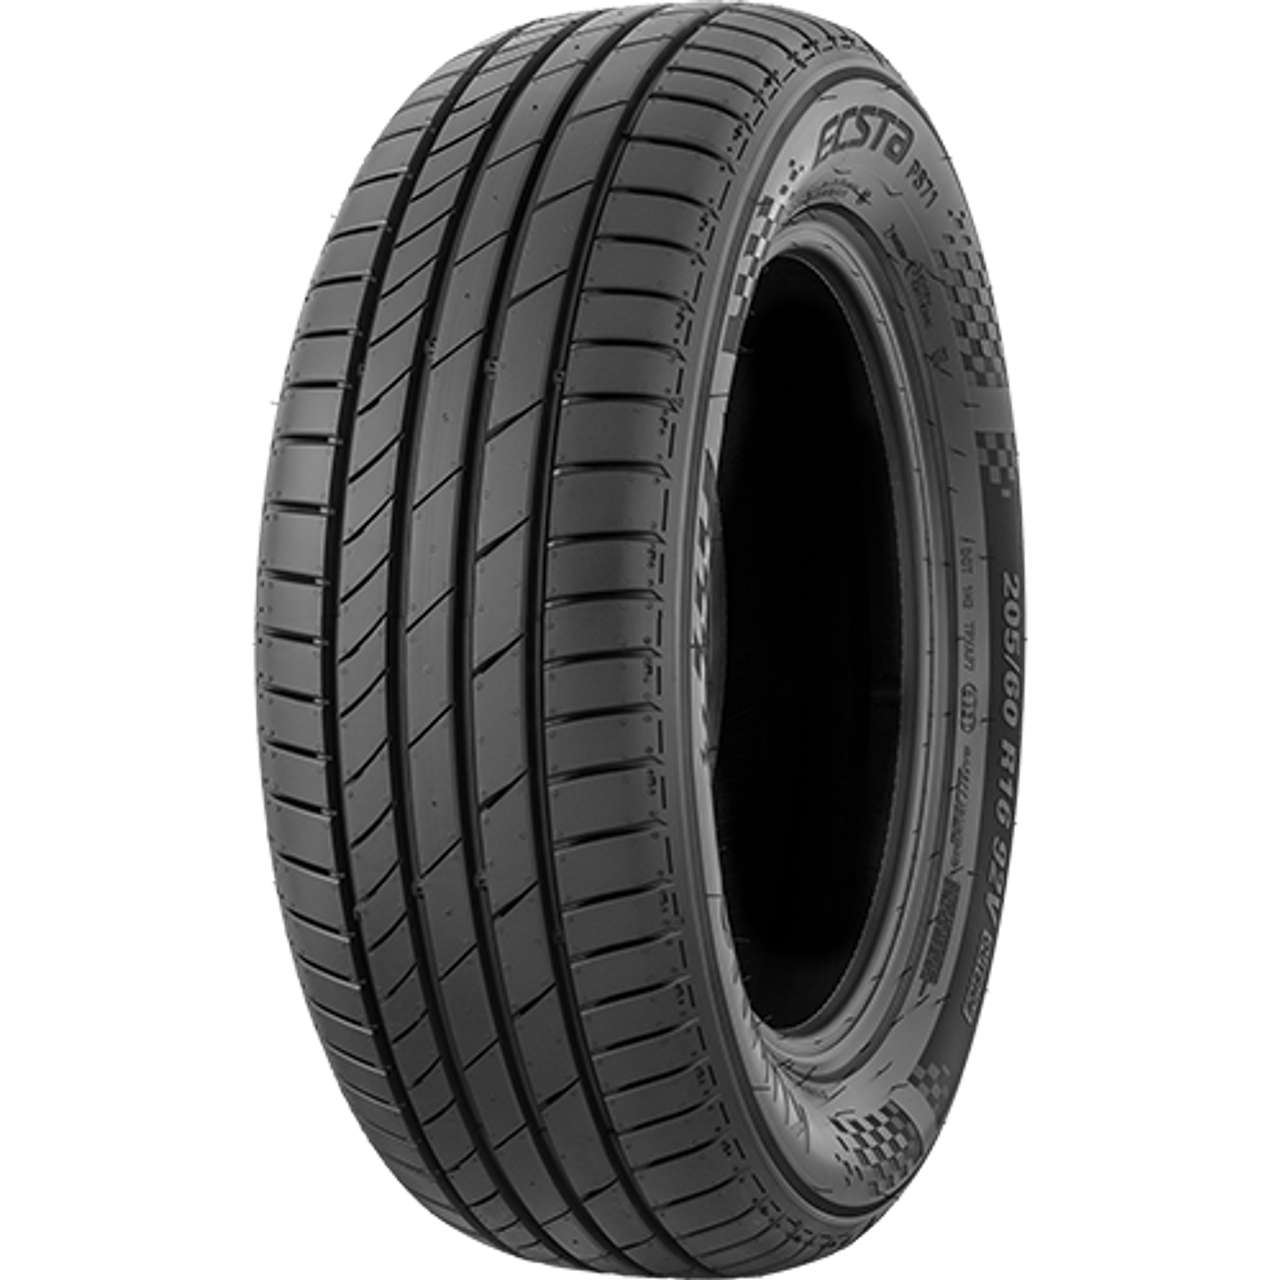 KUMHO ECSTA PS71 225/45ZR19 96Y BSW